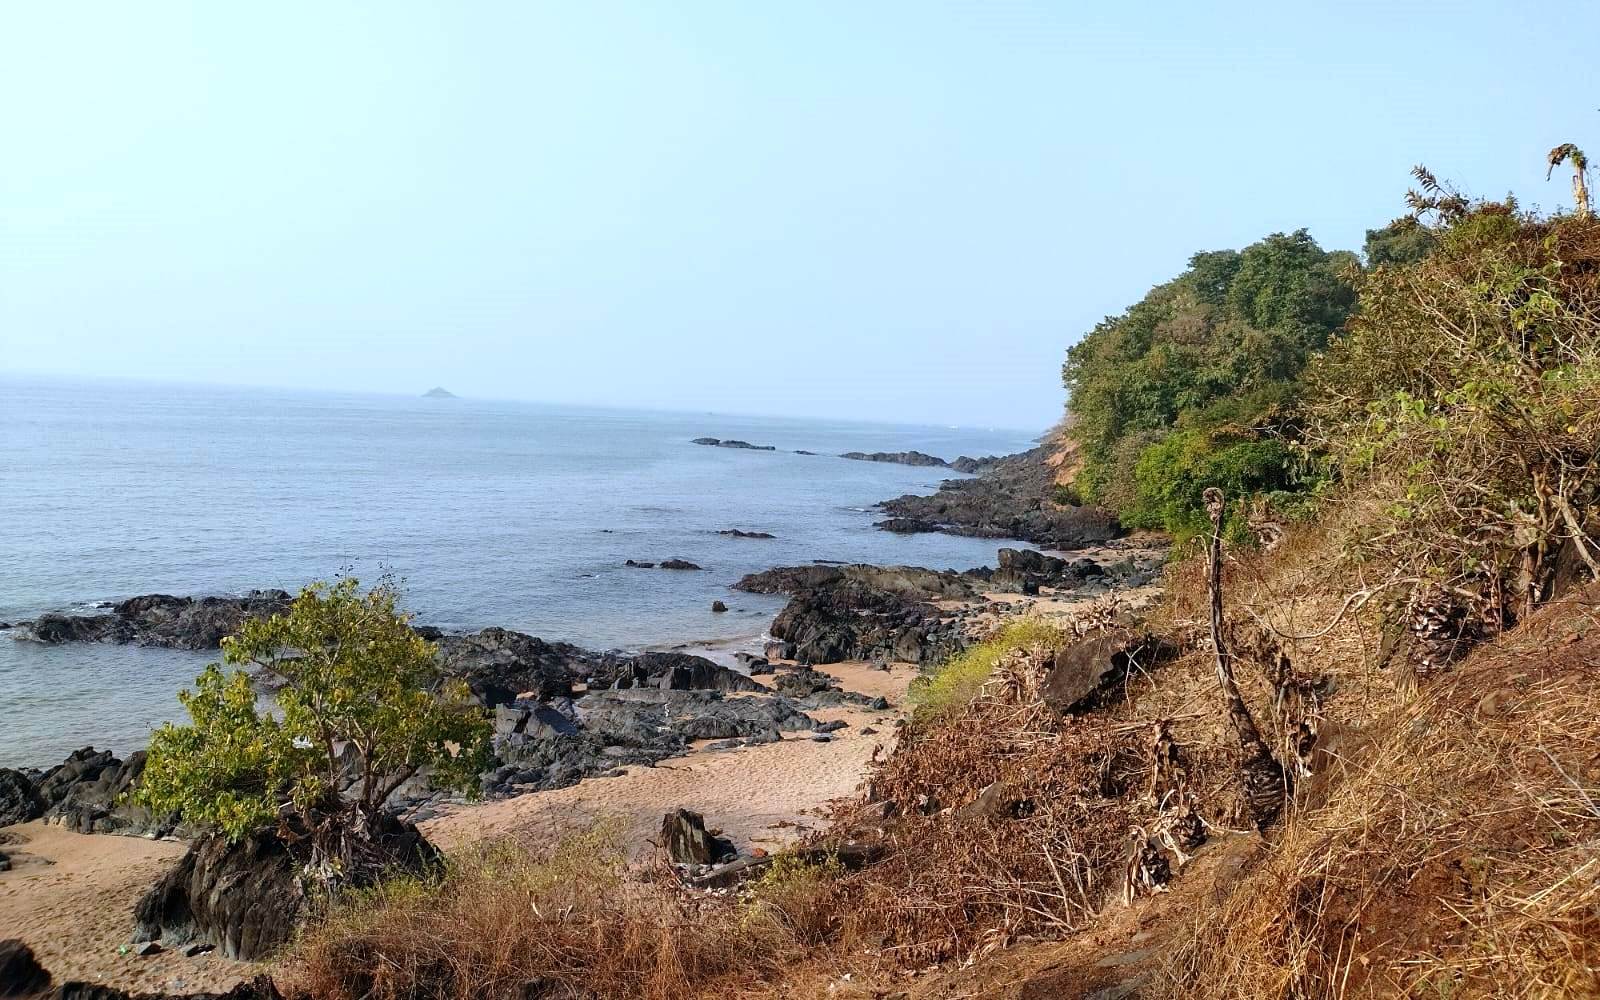 Sea Facing Land bank For Sale In Goa Beach Touch Property Prime Location For Hotel Resort or Bungalow Farmhouse project